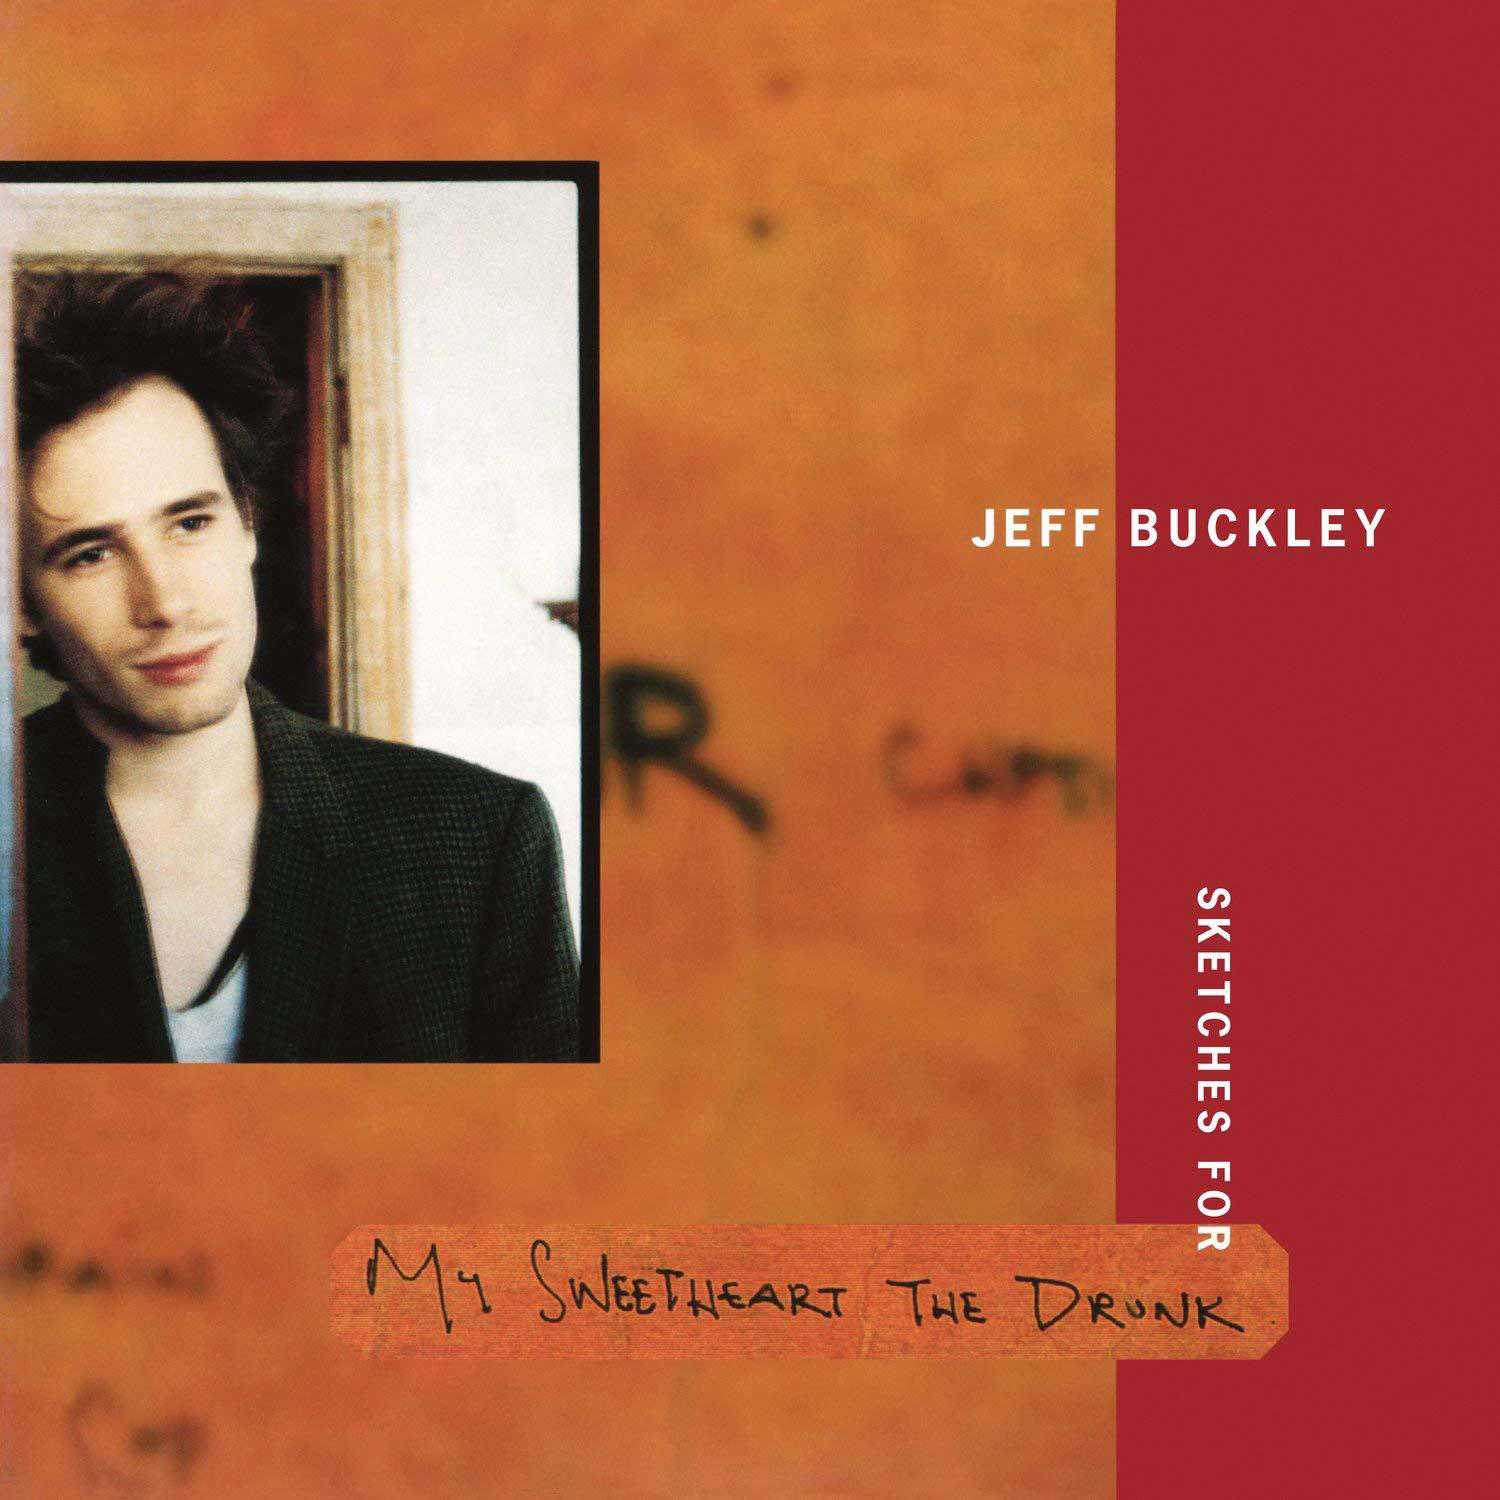 Jeff Buckley - (Vinyl) Sketches The My Drunk - for Sweetheart